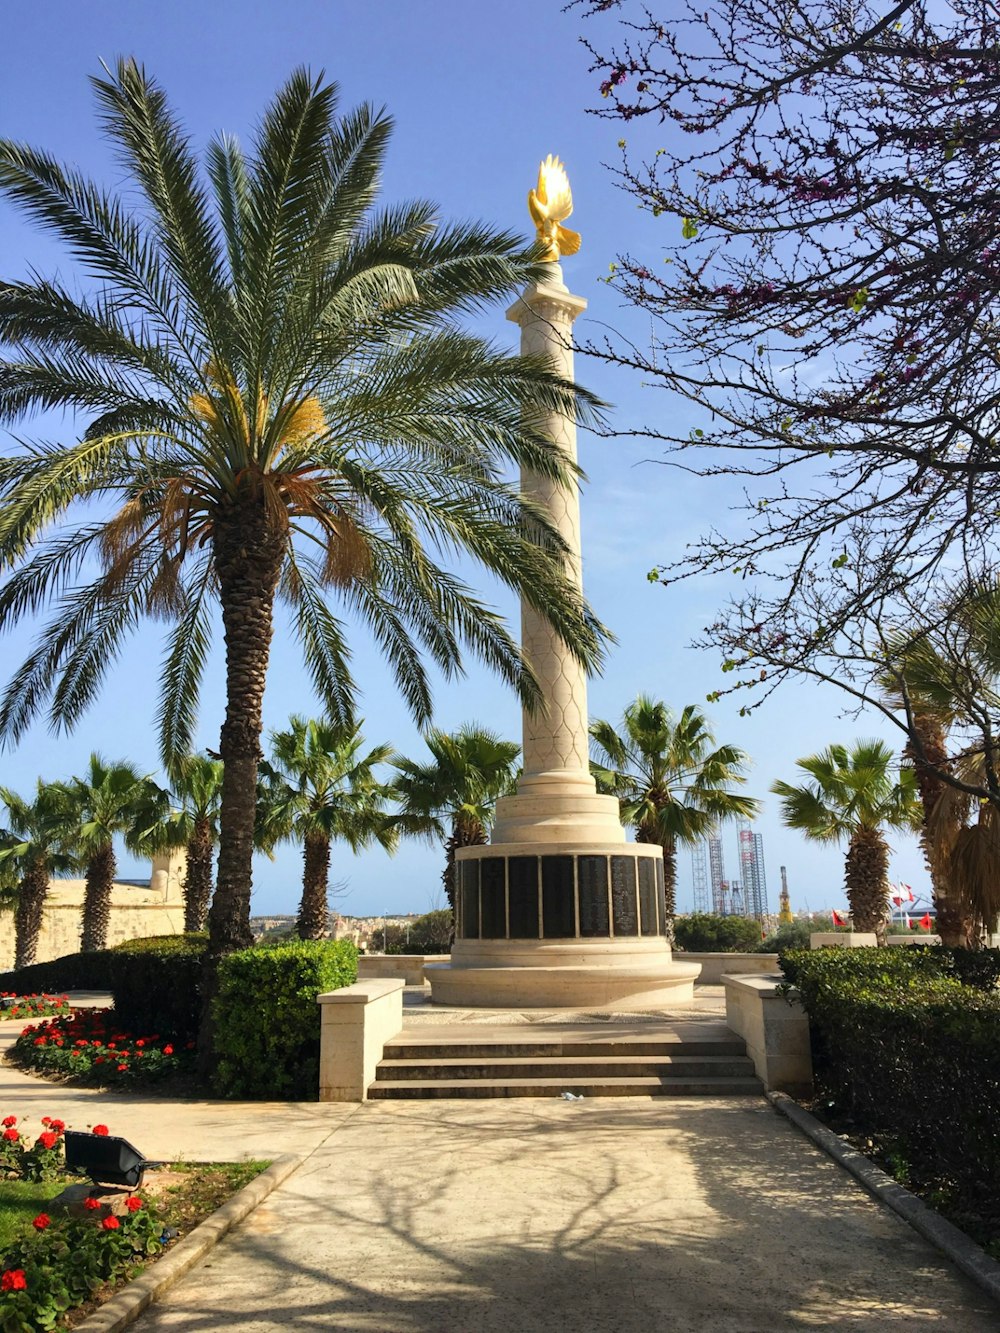 a large white monument with a golden top surrounded by palm trees